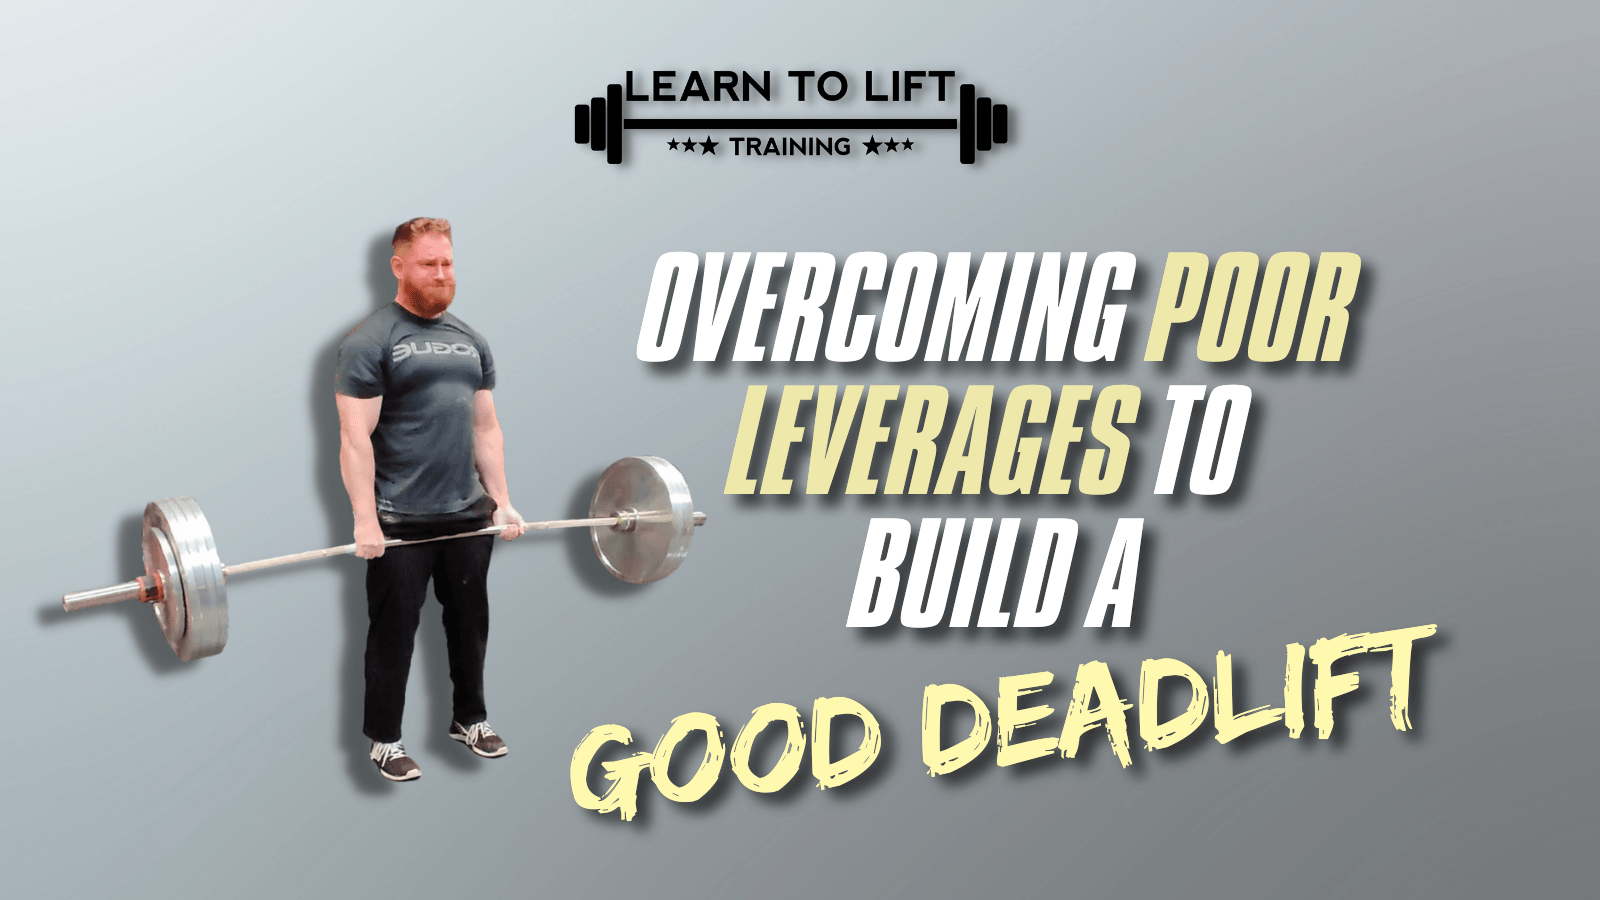 Personal Training Glasgow - Overcoming Poor Leverages To Build A Good Deadlift